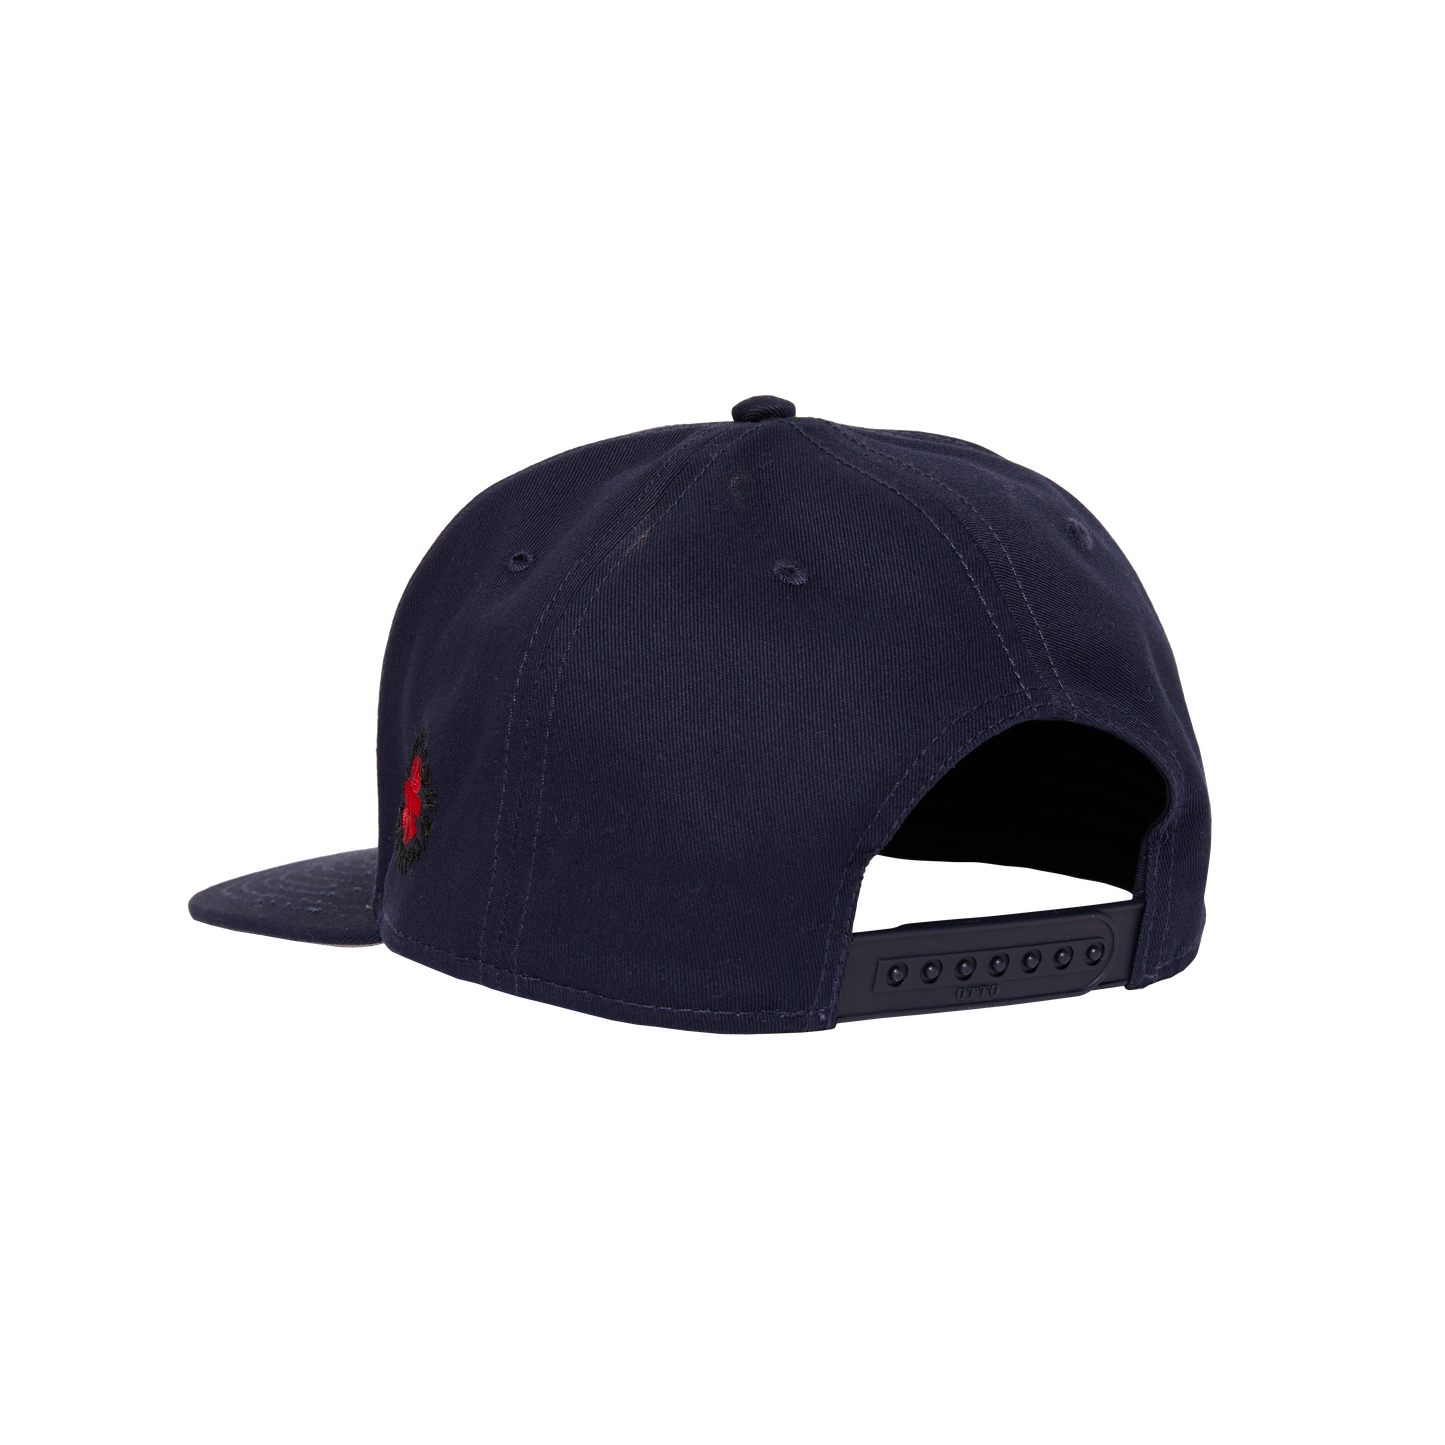 Peppers Snapback Hat - Navy